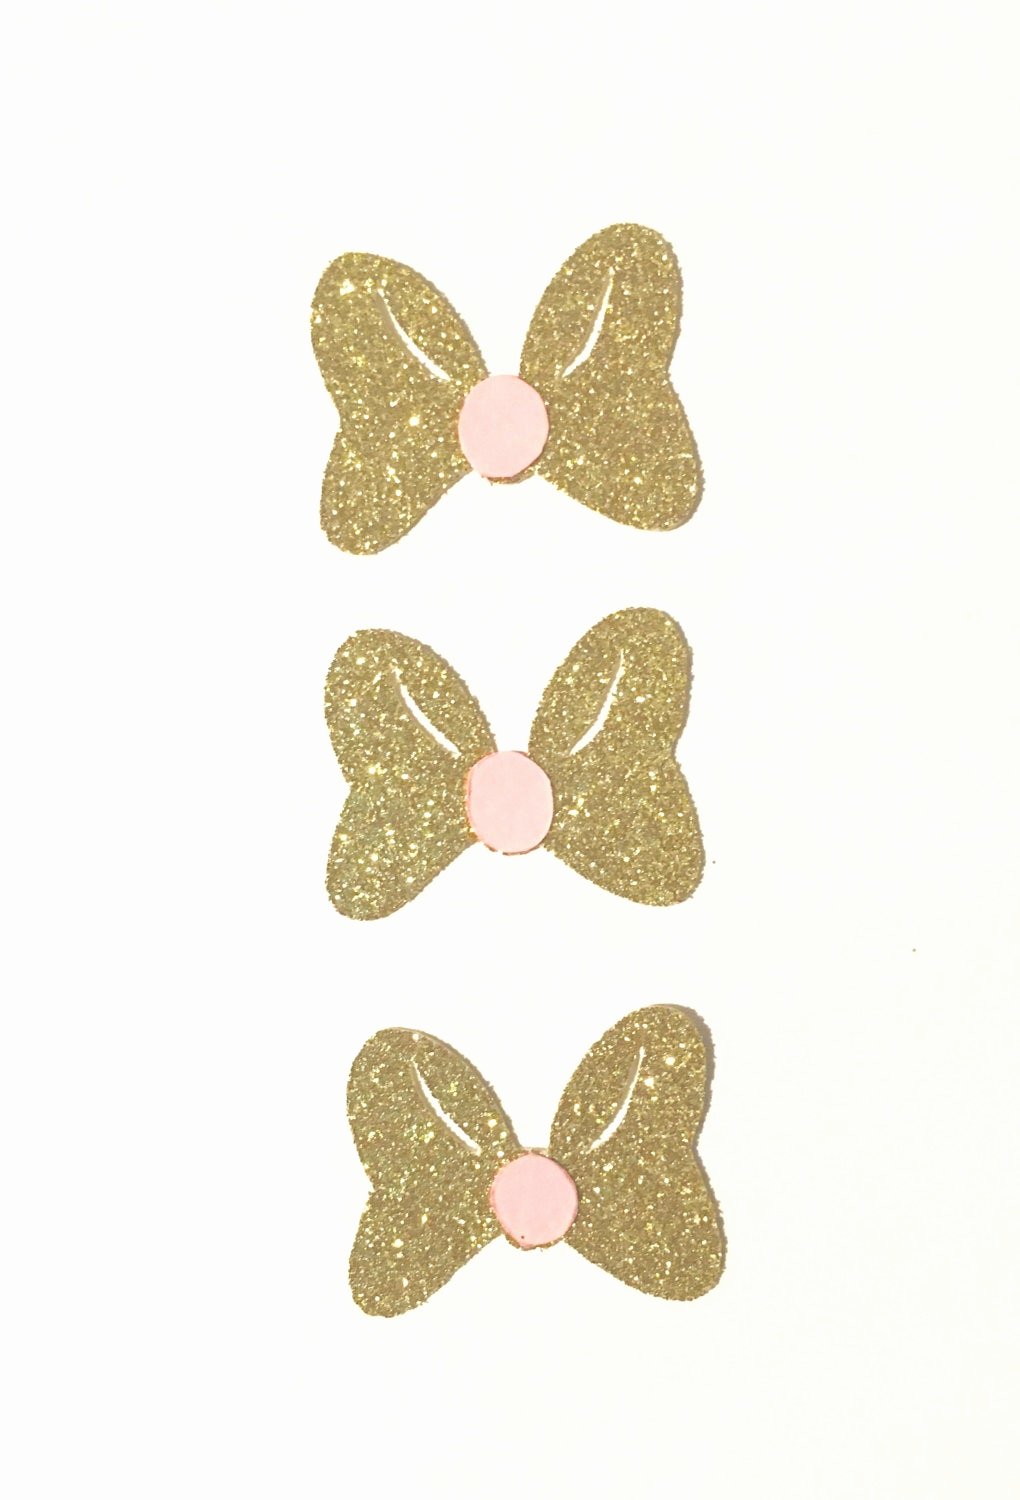 Minnie Mouse Bow Cut Out Luxury Minnie Mouse Inspired Gold and Pink Bows Paper Cut Outs